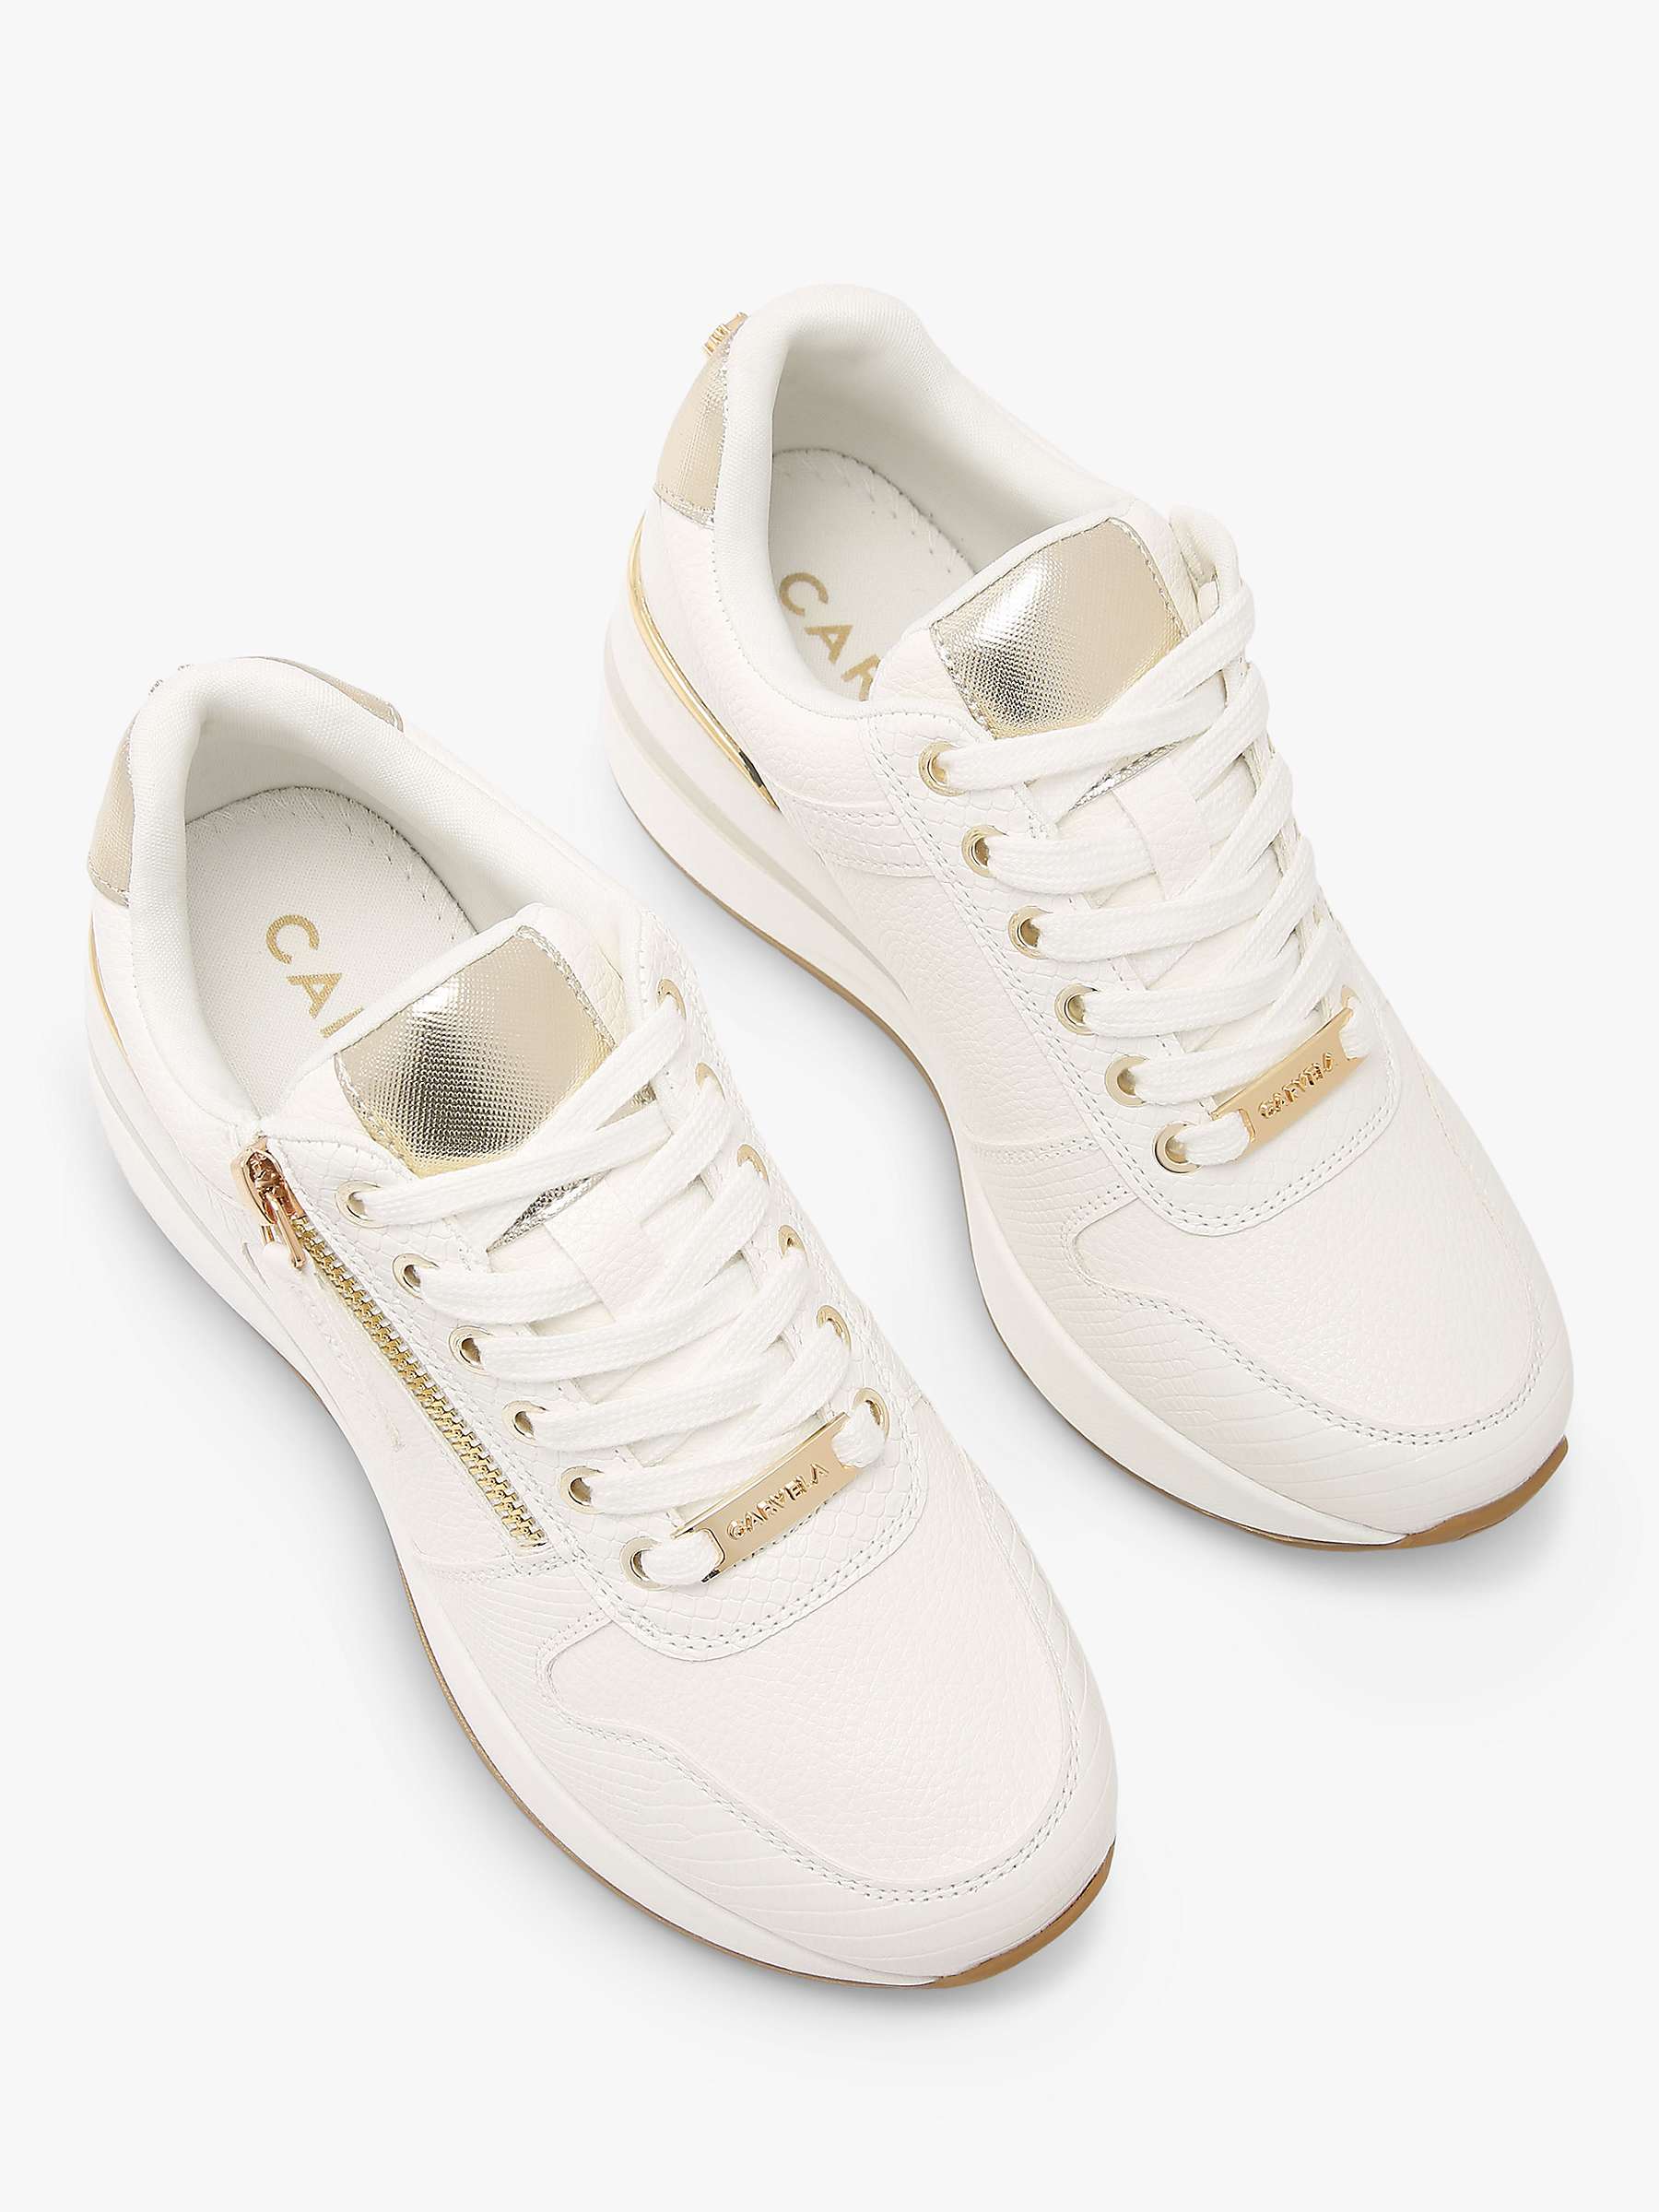 Buy Carvela High Rise Trainers Online at johnlewis.com